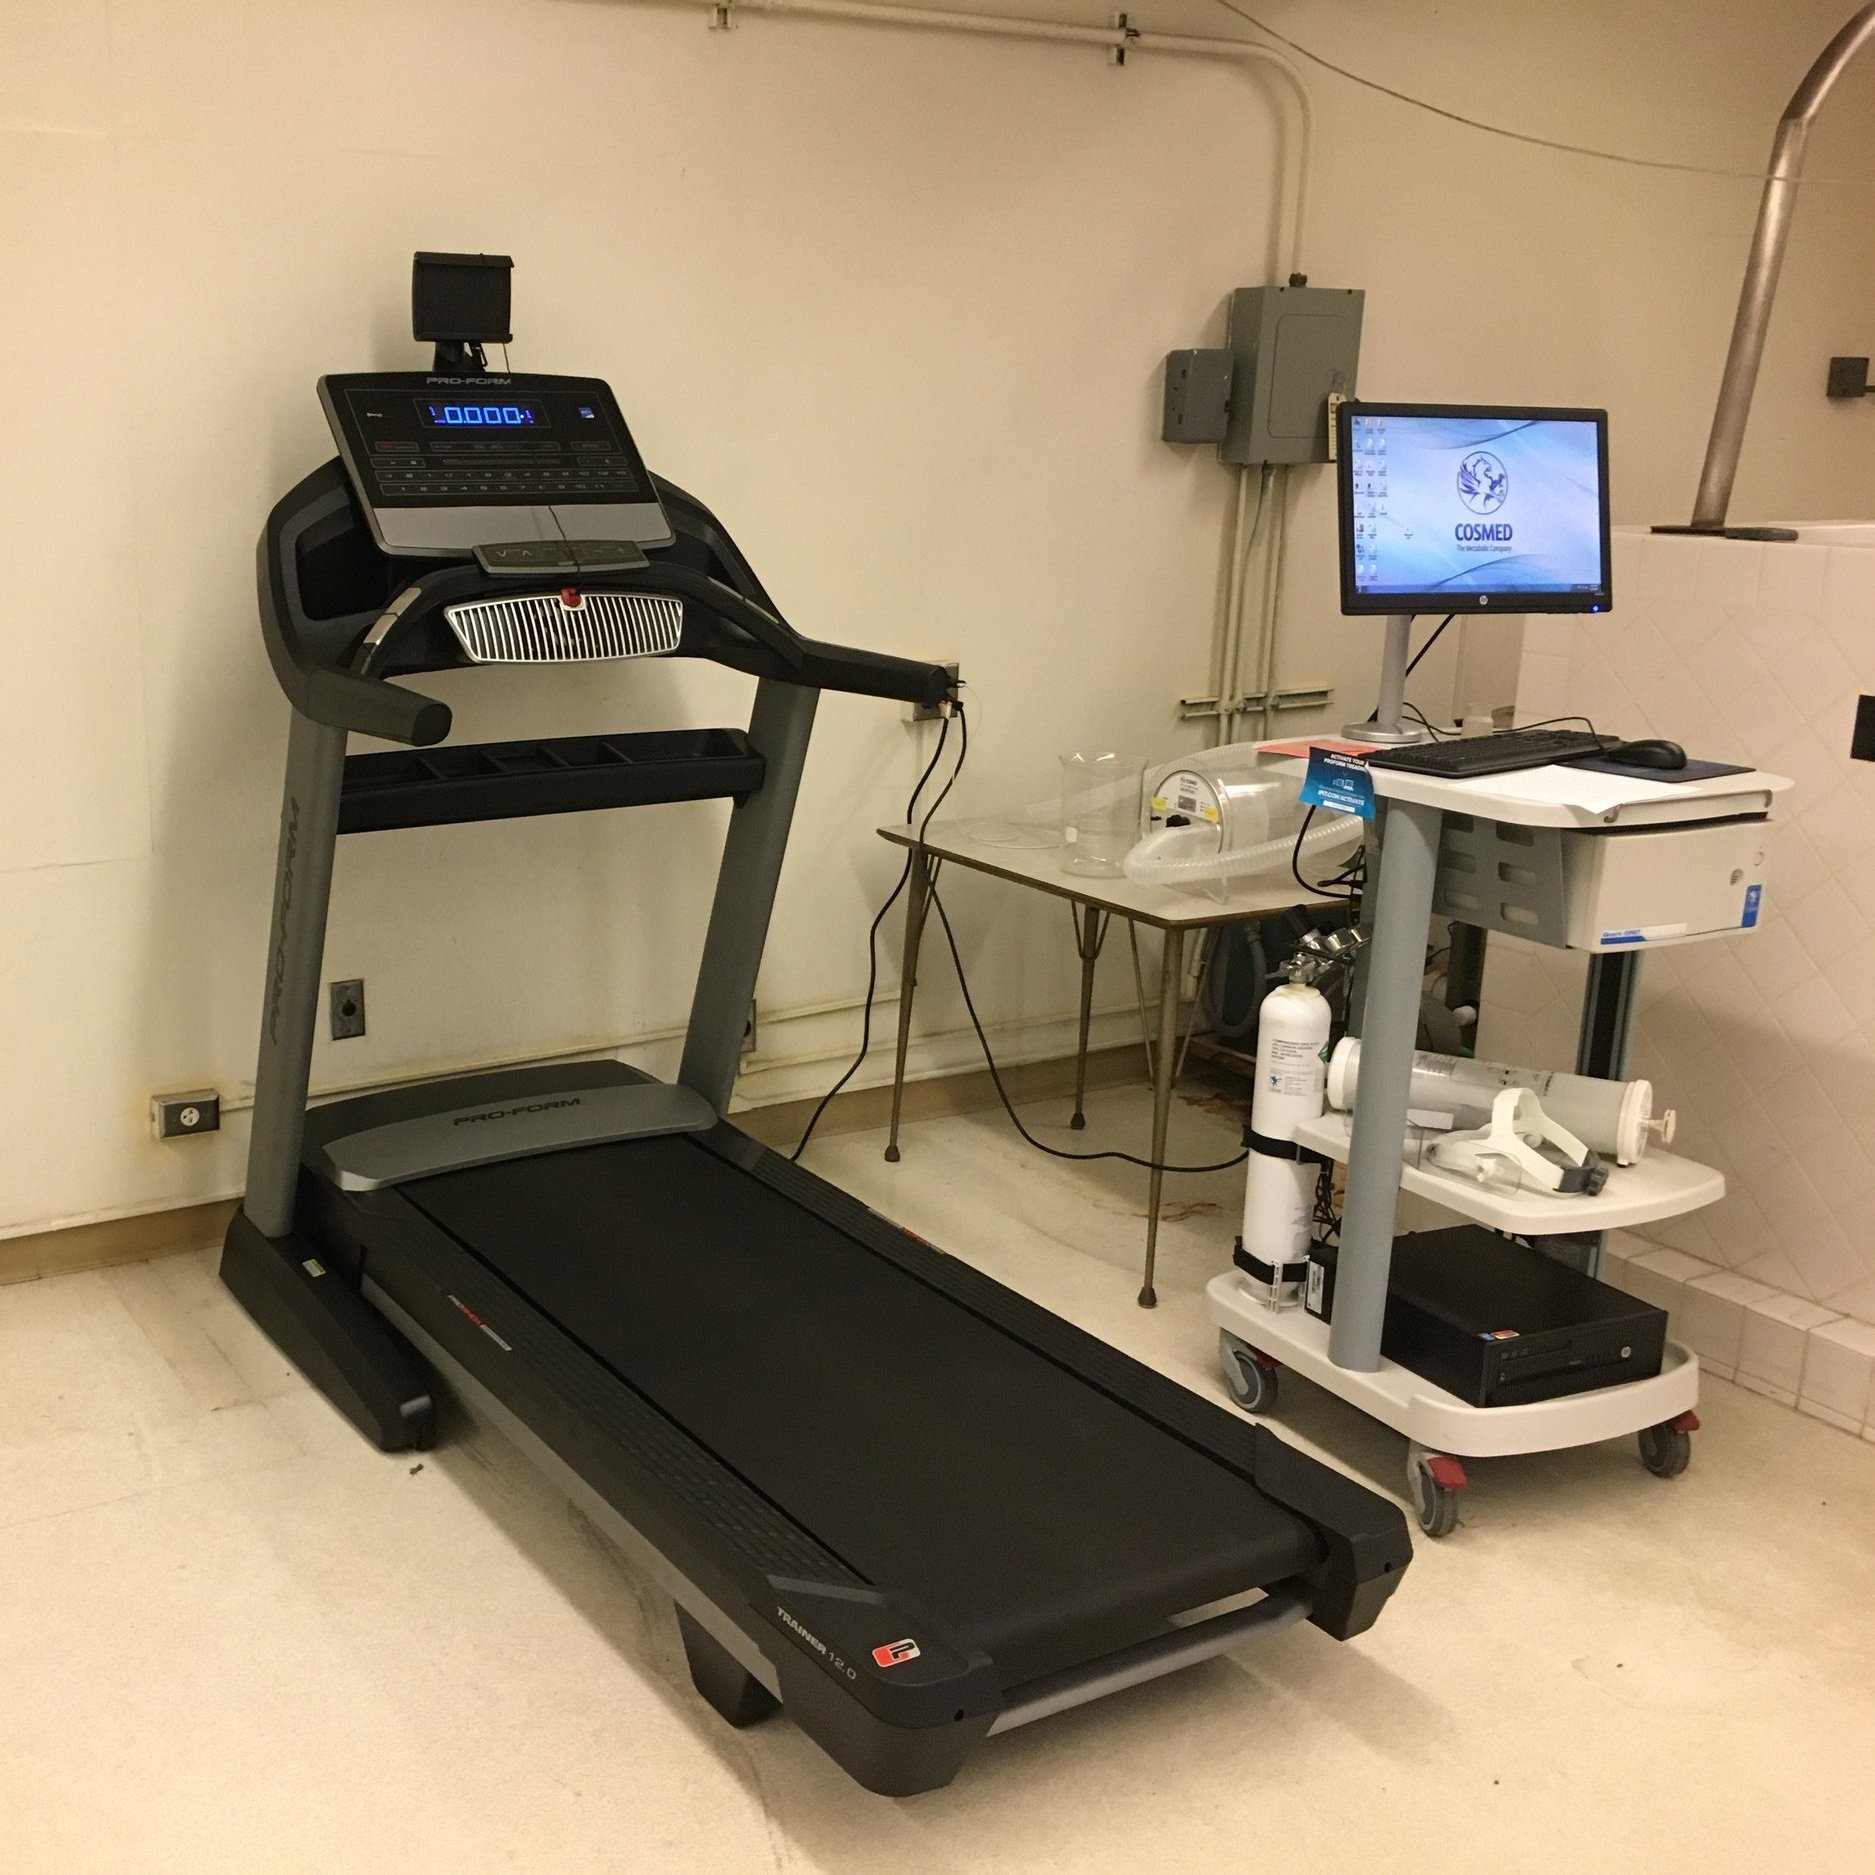 Clinical treadmill and metabolic cart